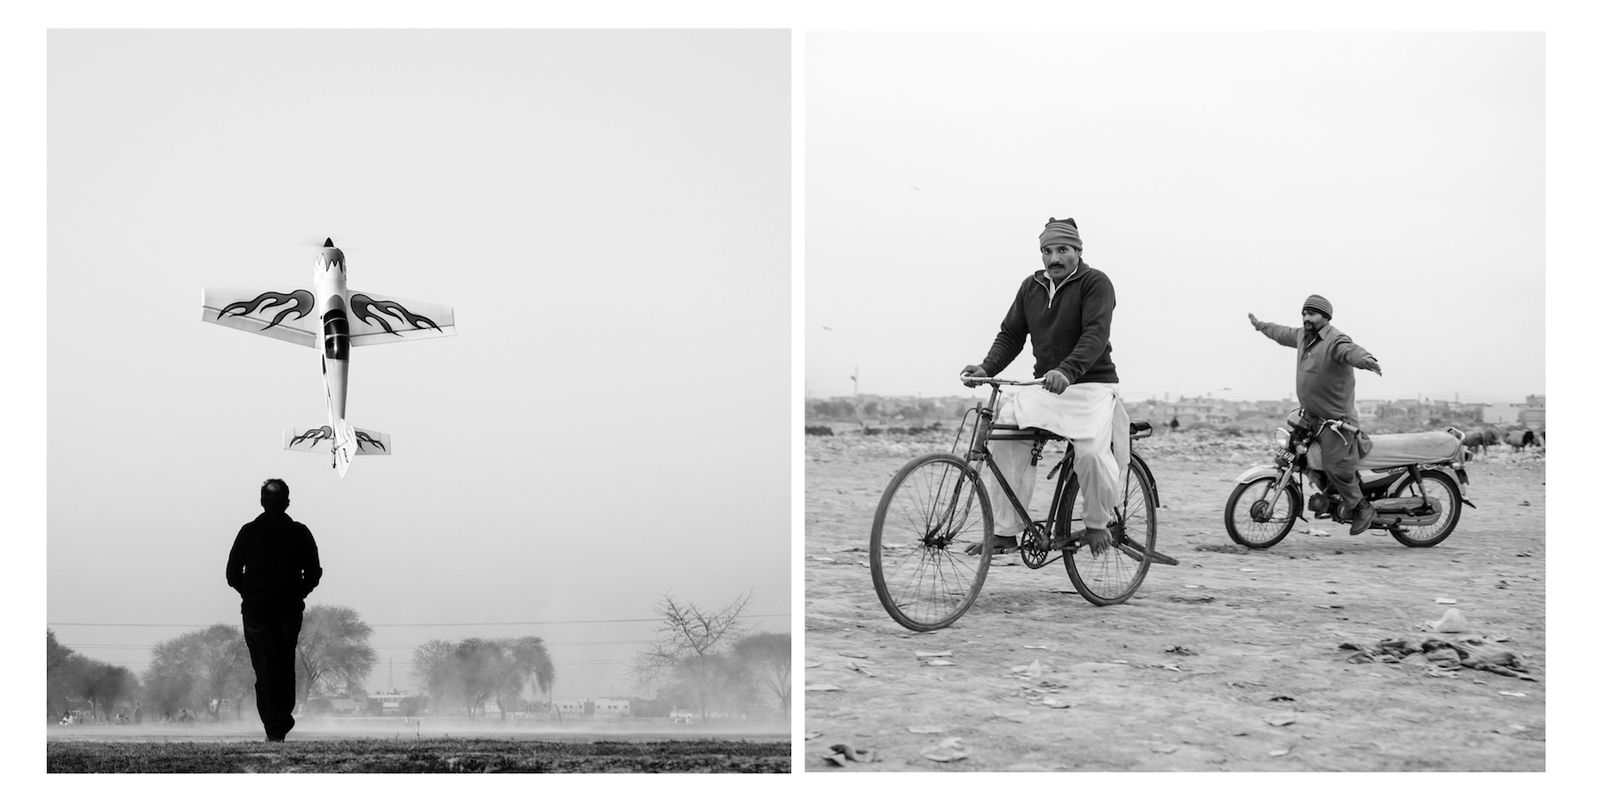 © Marylise Vigneau - Image from the Pakistani Diptychs photography project